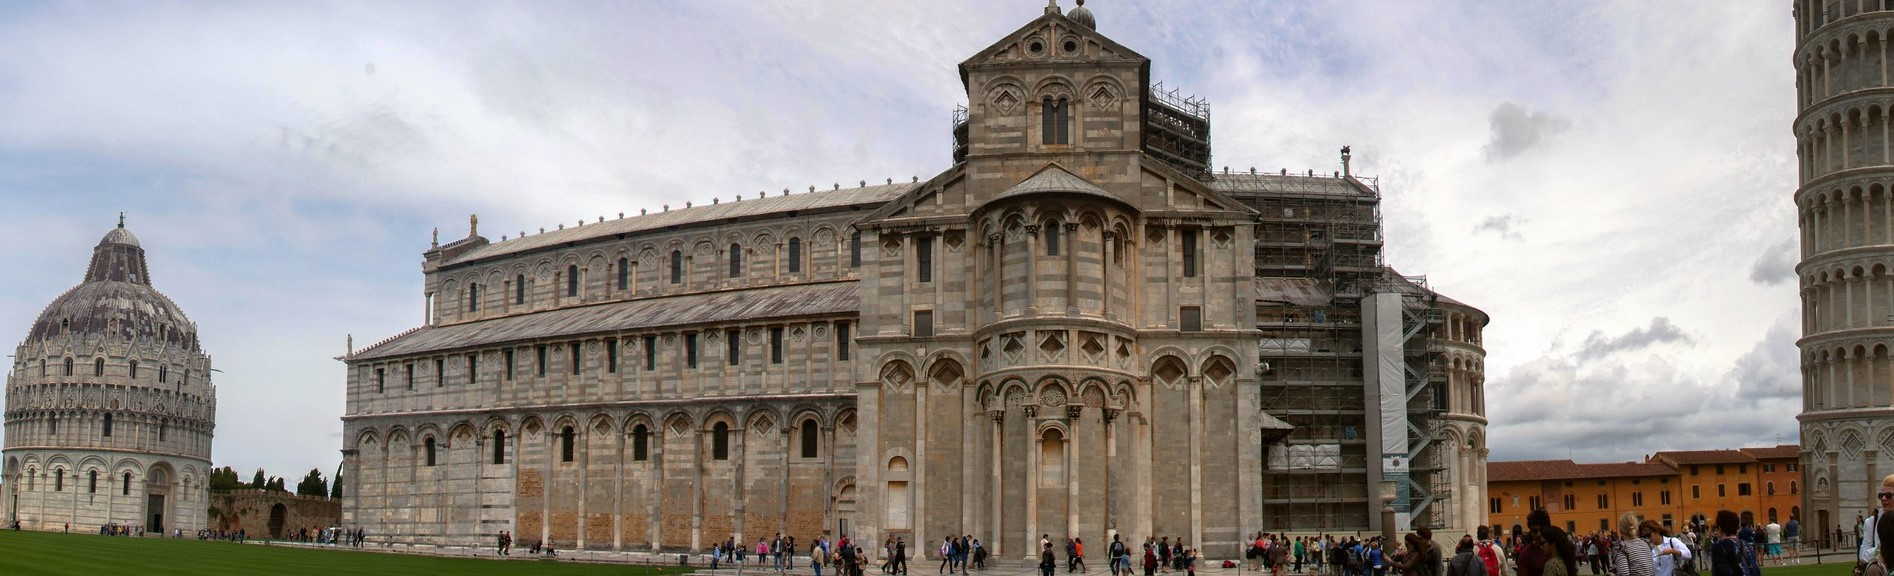 The Best Attractions to see in Pisa